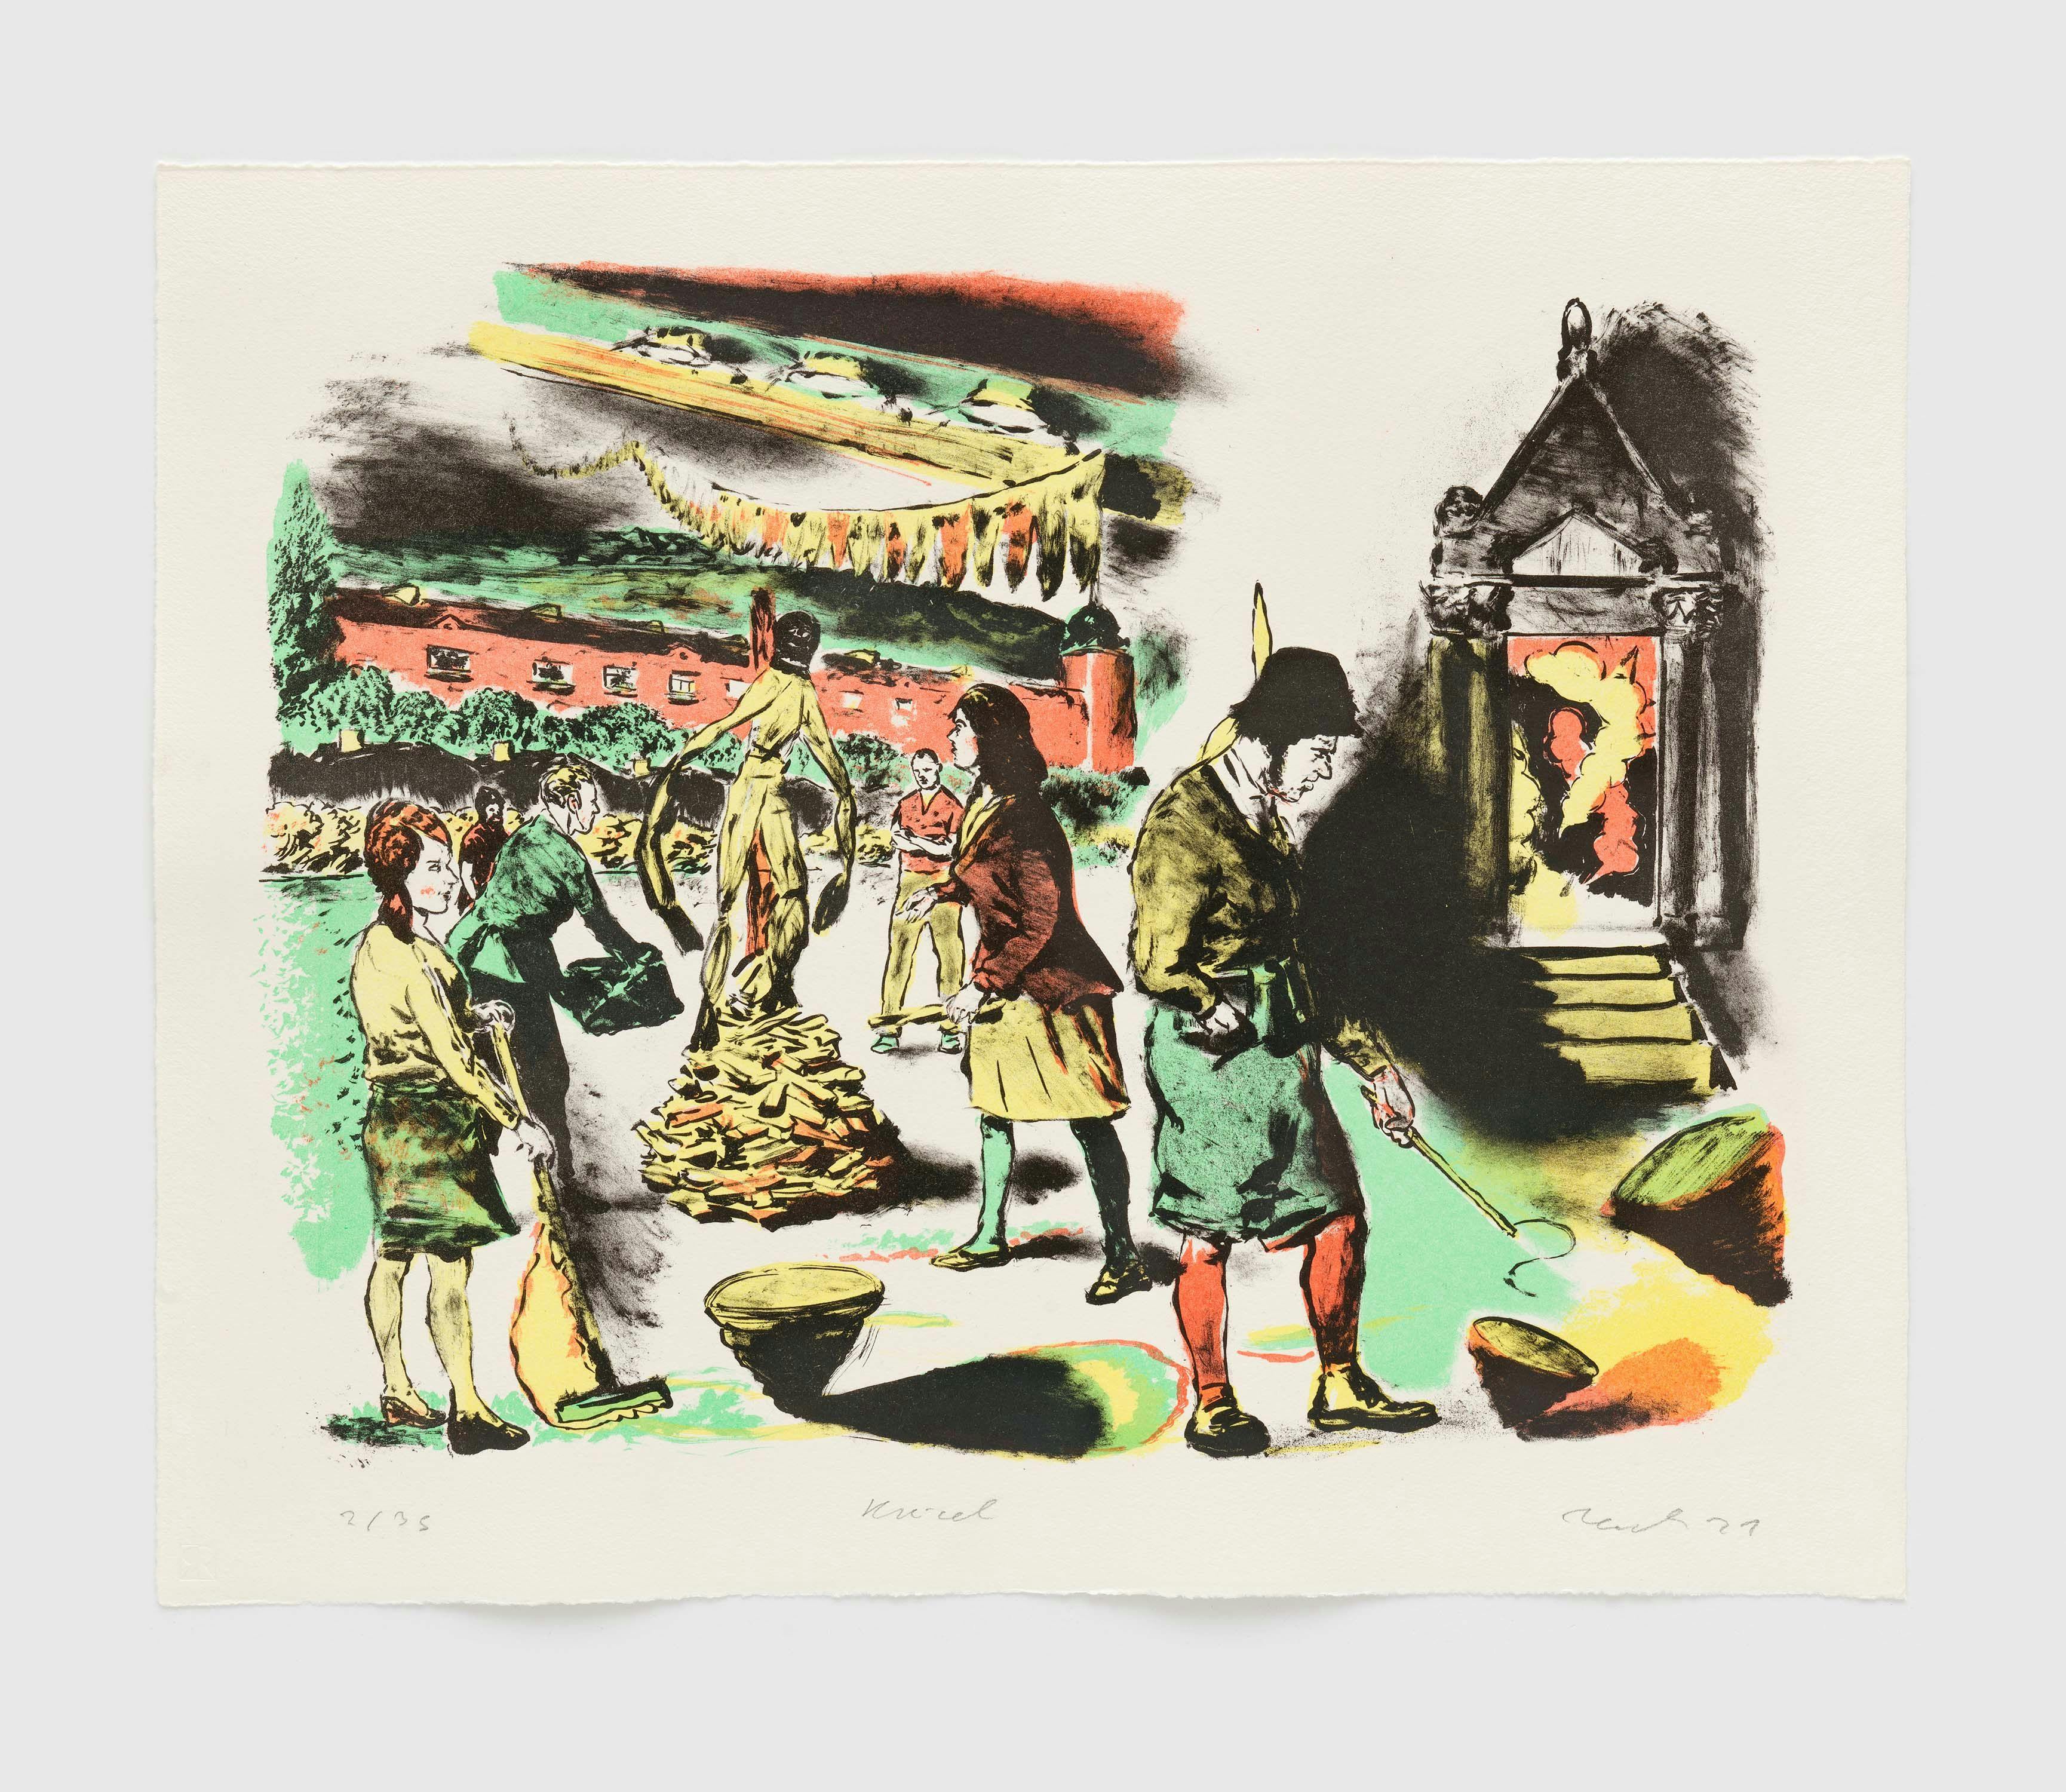 A print by Neo Rauch, titled Kreisel, dated 2021.